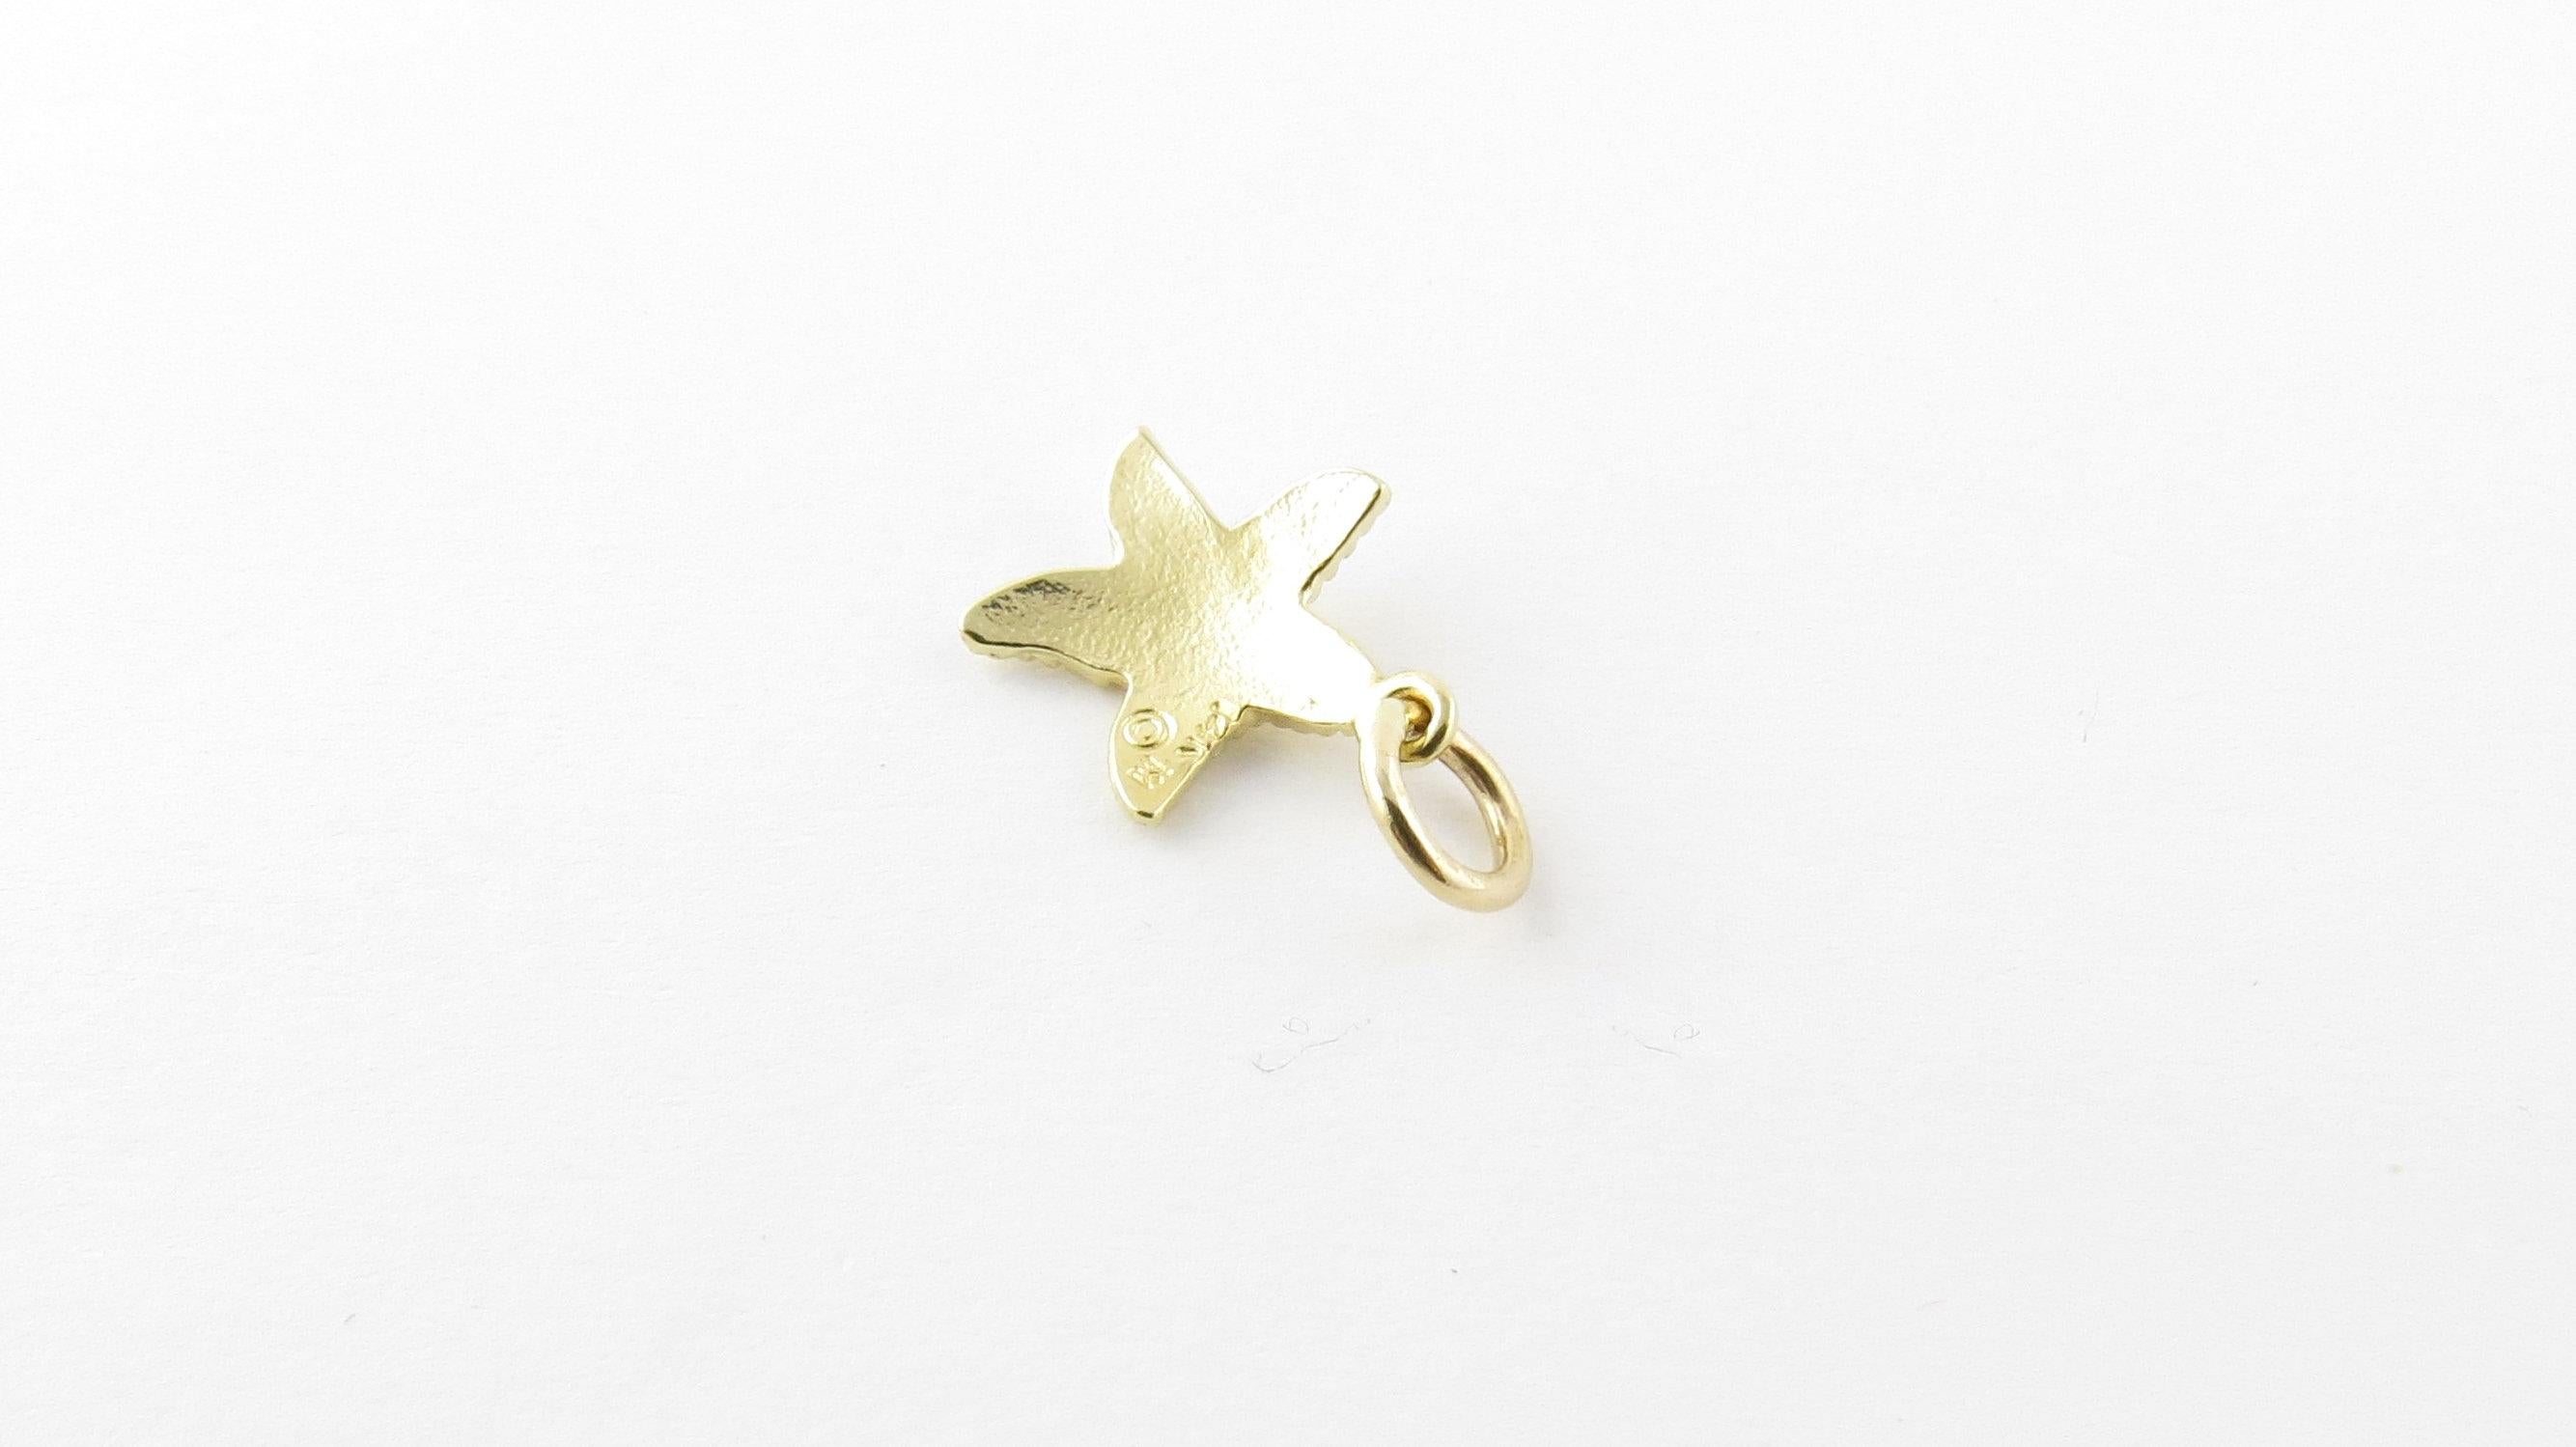 Vintage 14 Karat Yellow Gold Starfish Charm. Bring back those lazy days on the beach! This lovely charm features a miniature starfish meticulously detailed in 14K yellow gold.
Size: 12 mm x 10 mm (actual charm) Weight: 0.2 dwt. / 0.4 gr. Stamped: